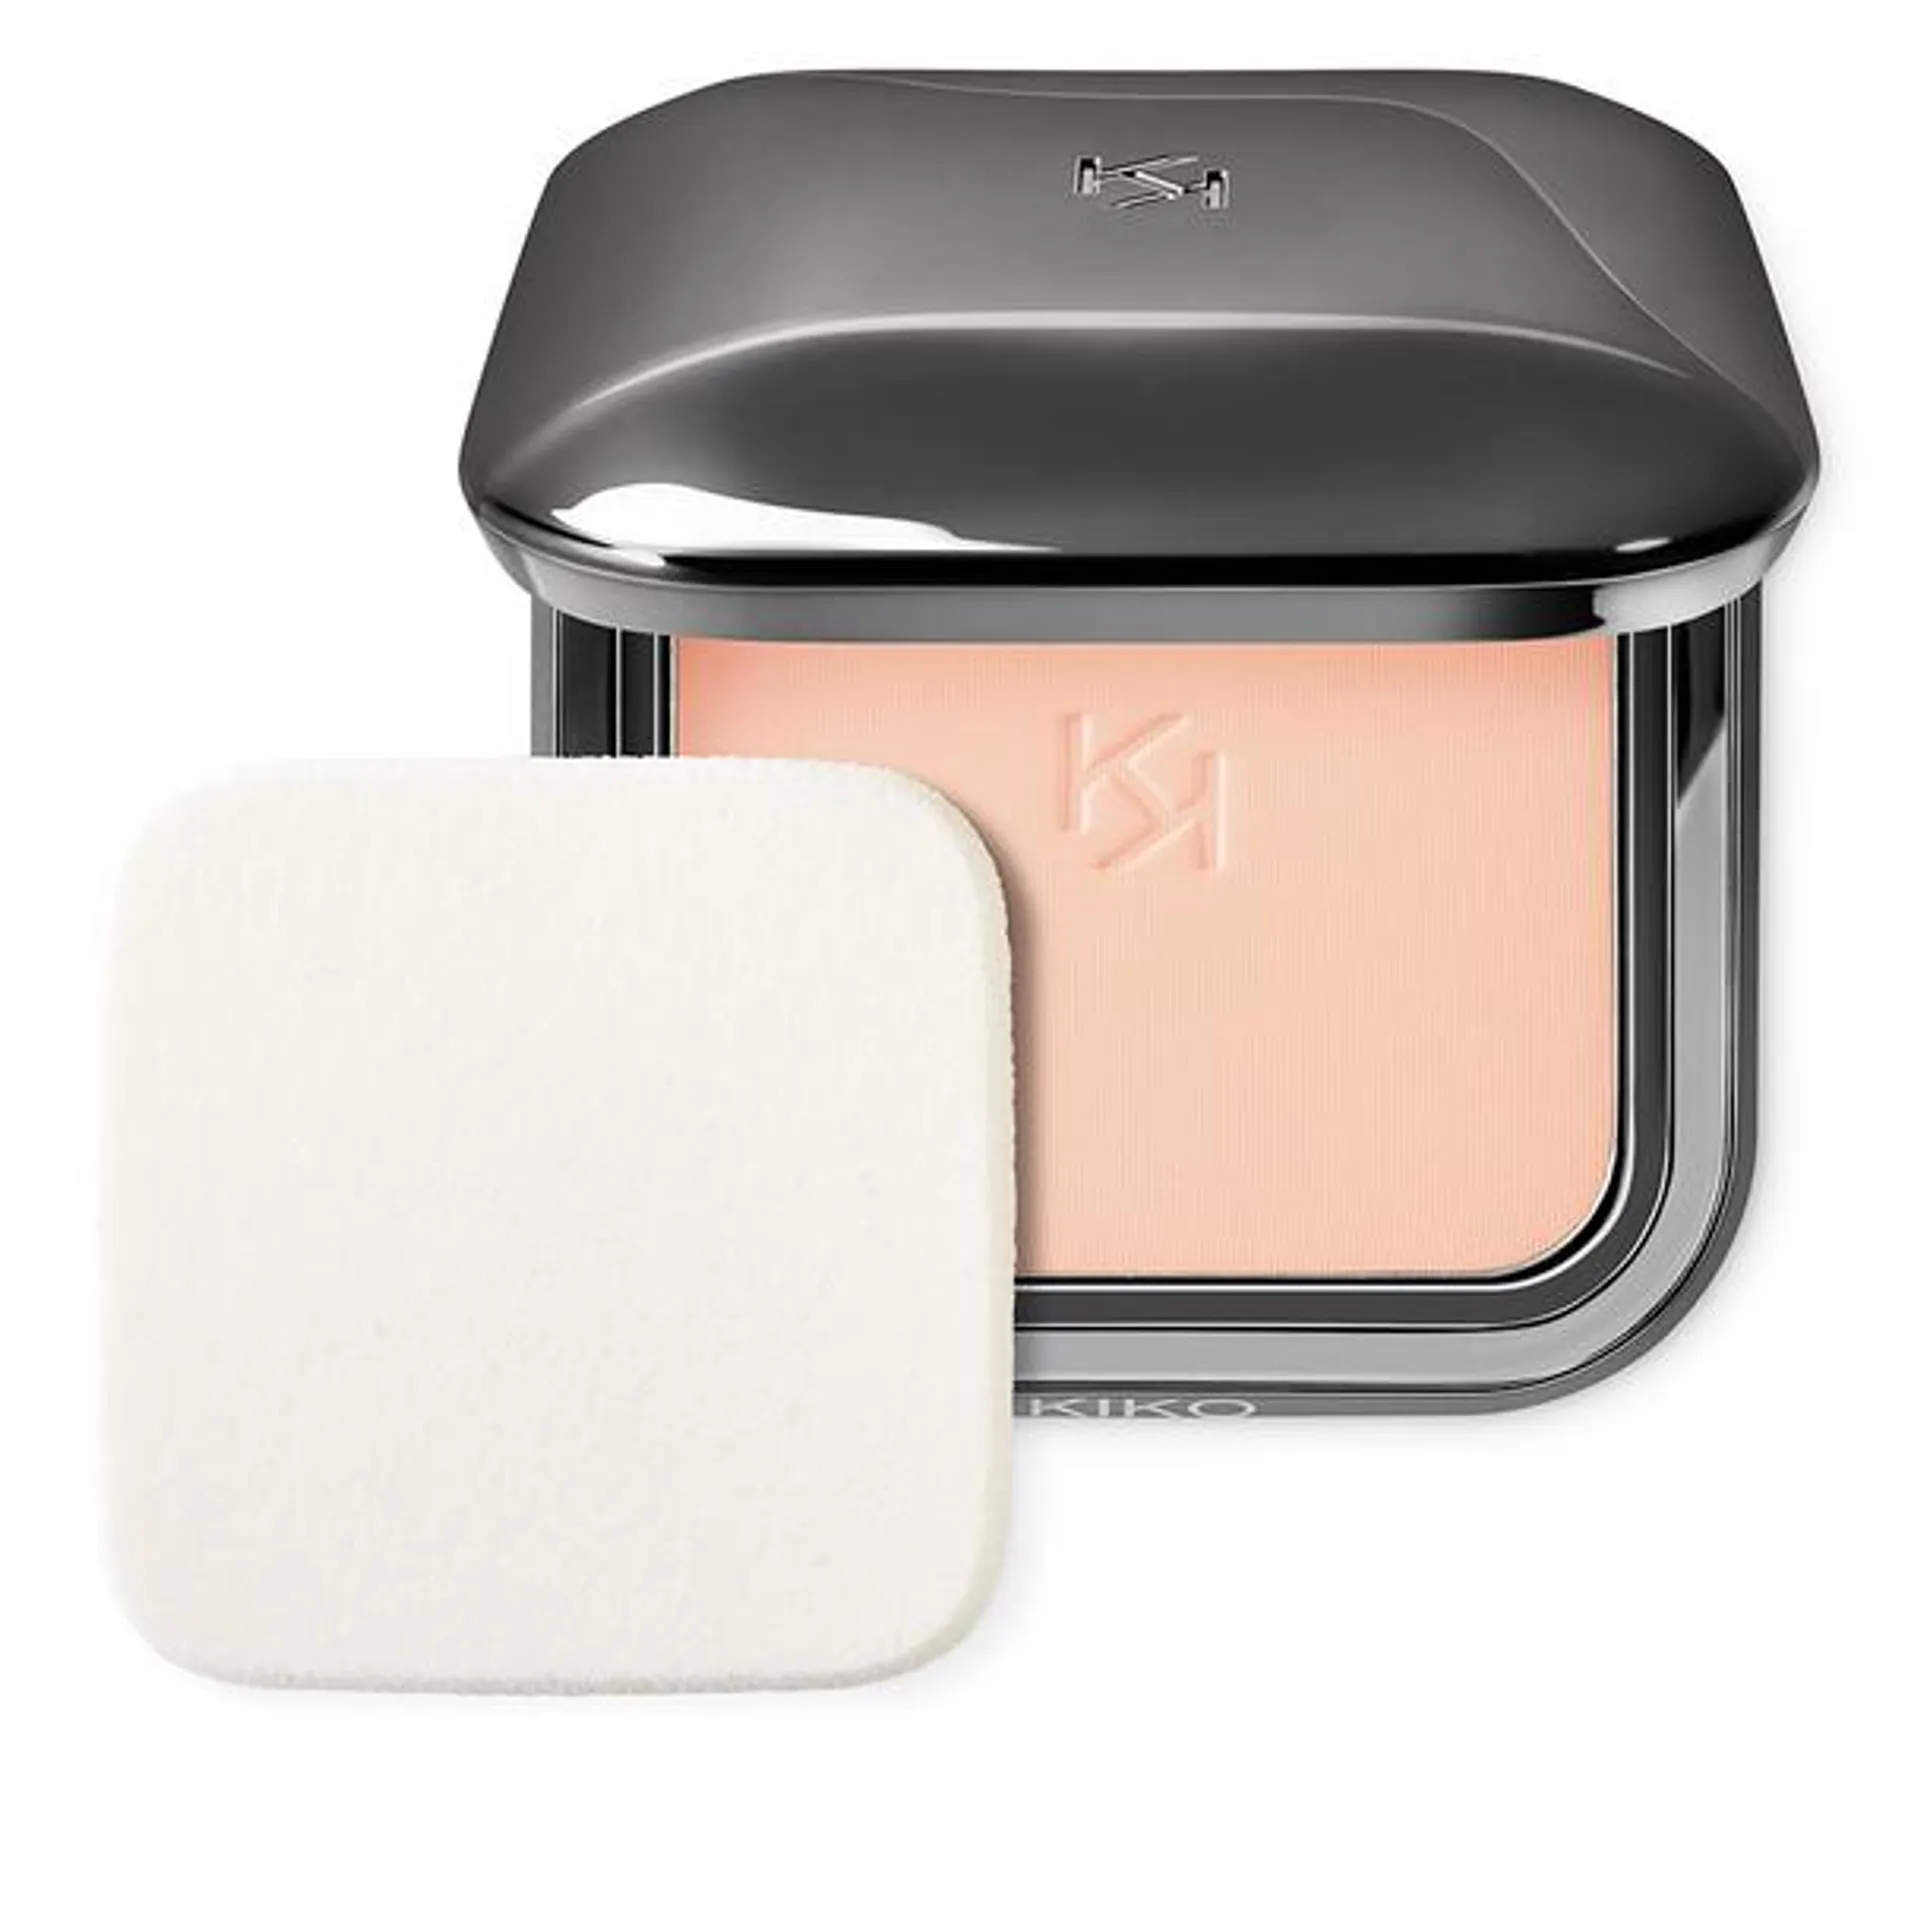 Smoothing pressed powder foundation with a matte finish and SPF 30